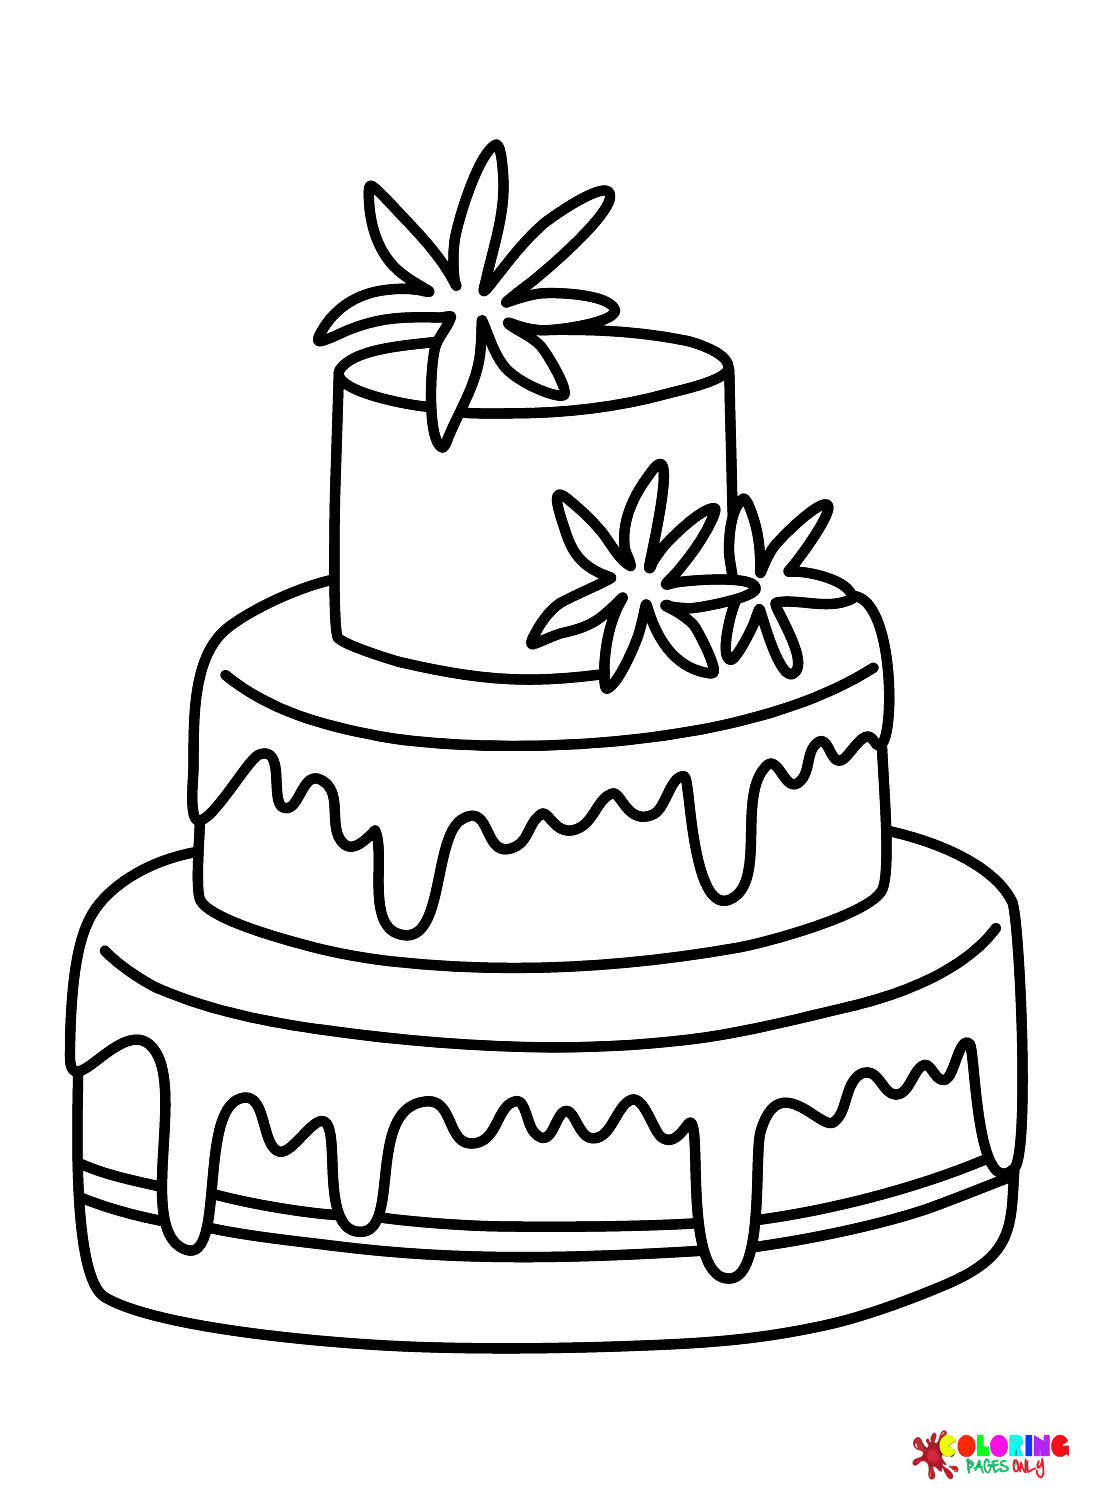 Beautiful Wedding Cake Coloring Page - Free Printable Coloring Pages